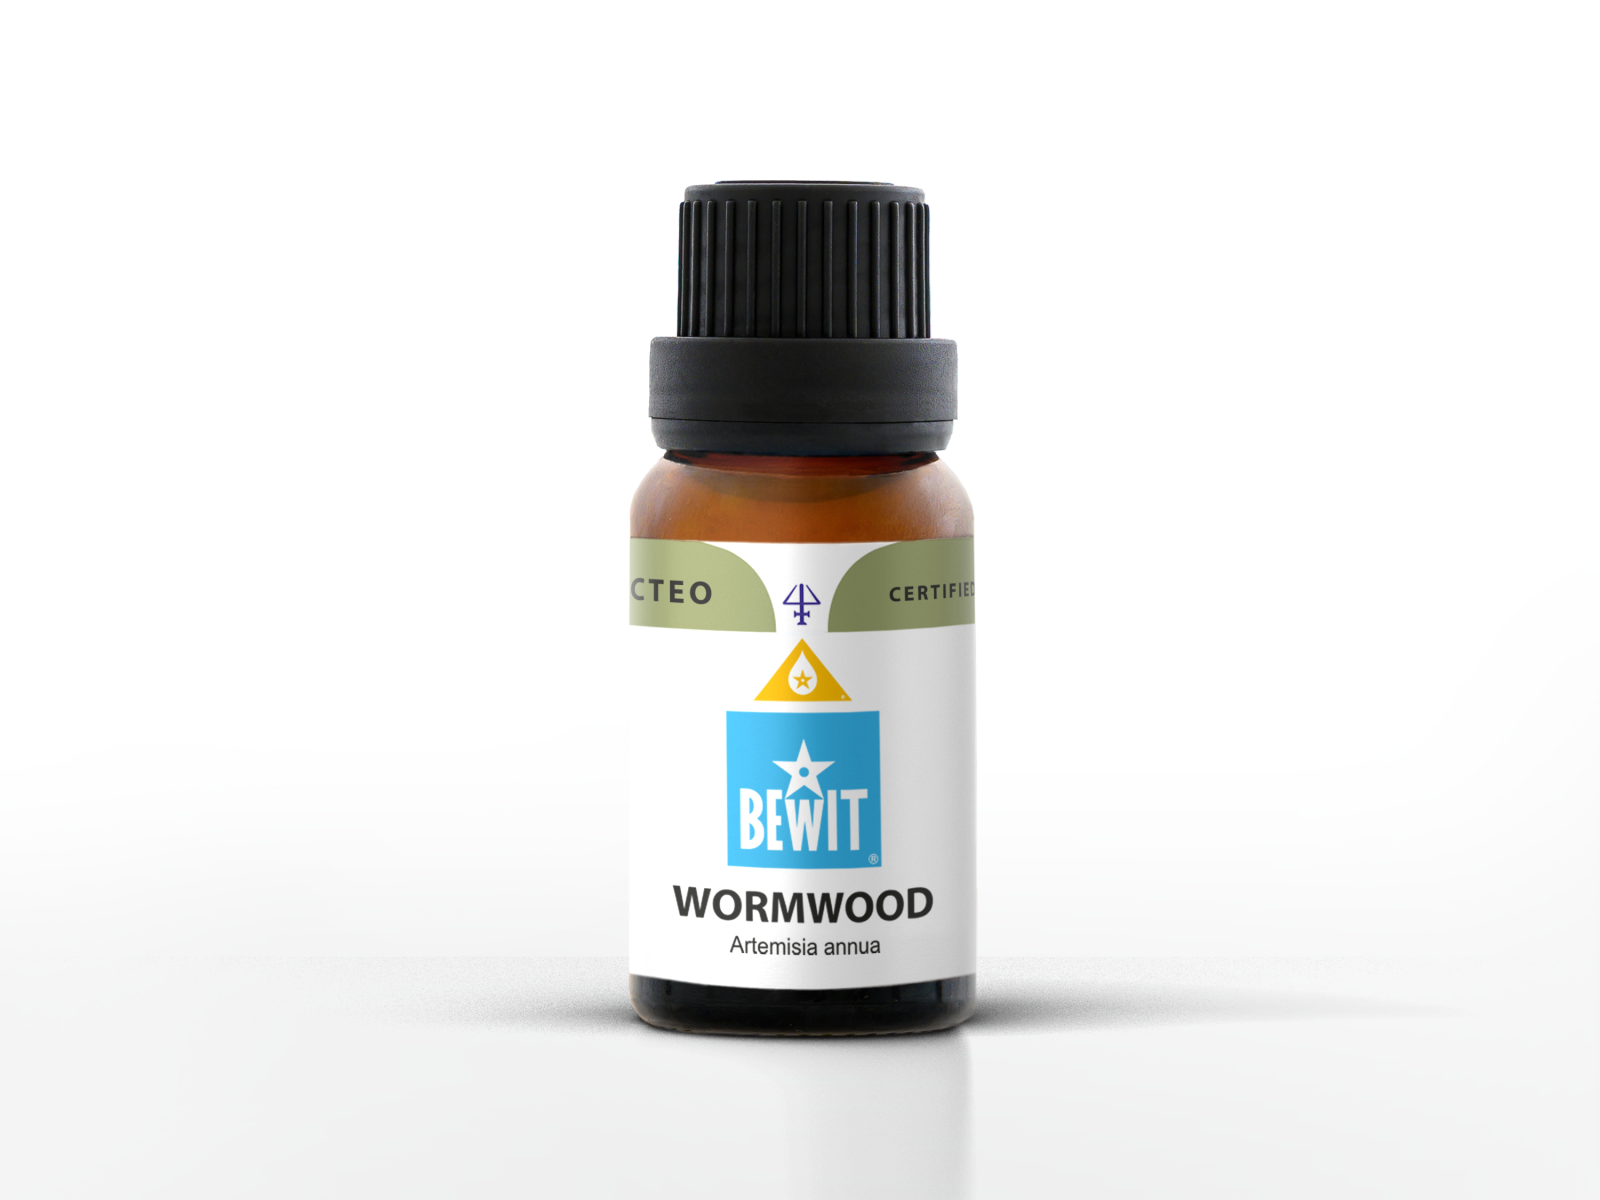 BEWIT Wormwood - 100% pure essential oil - 3